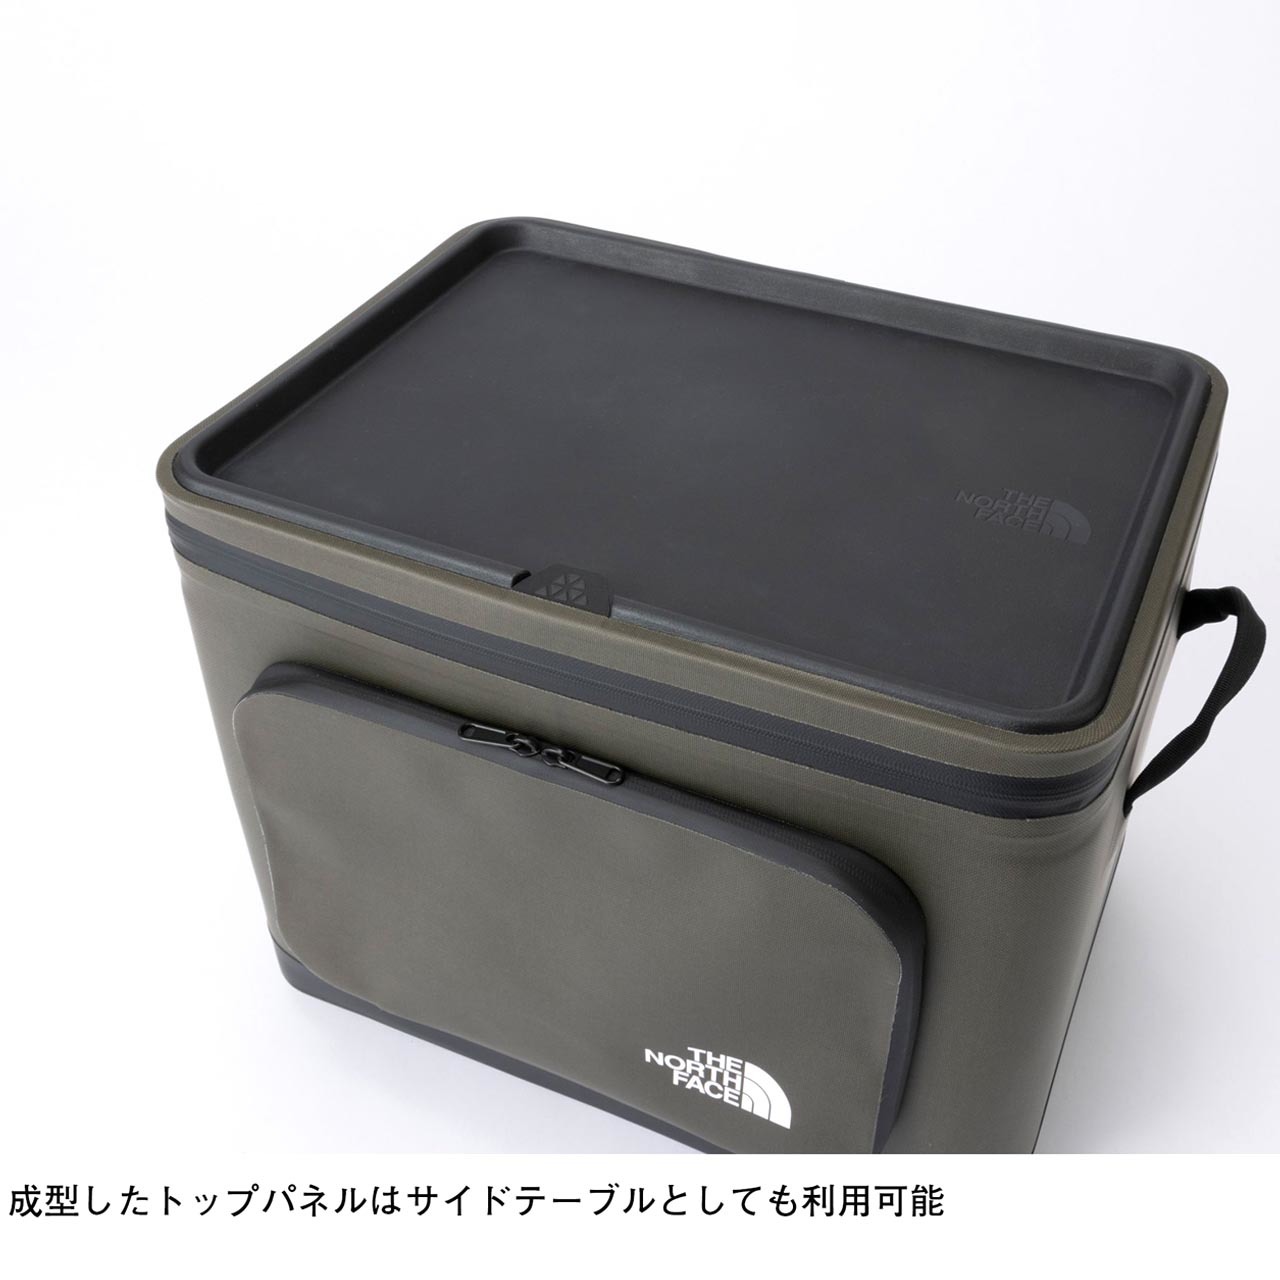 THE NORTH FACE [ザ・ノース・フェイス] Fieludens Gear Container [NM82235]_f0051306_06005801.jpg